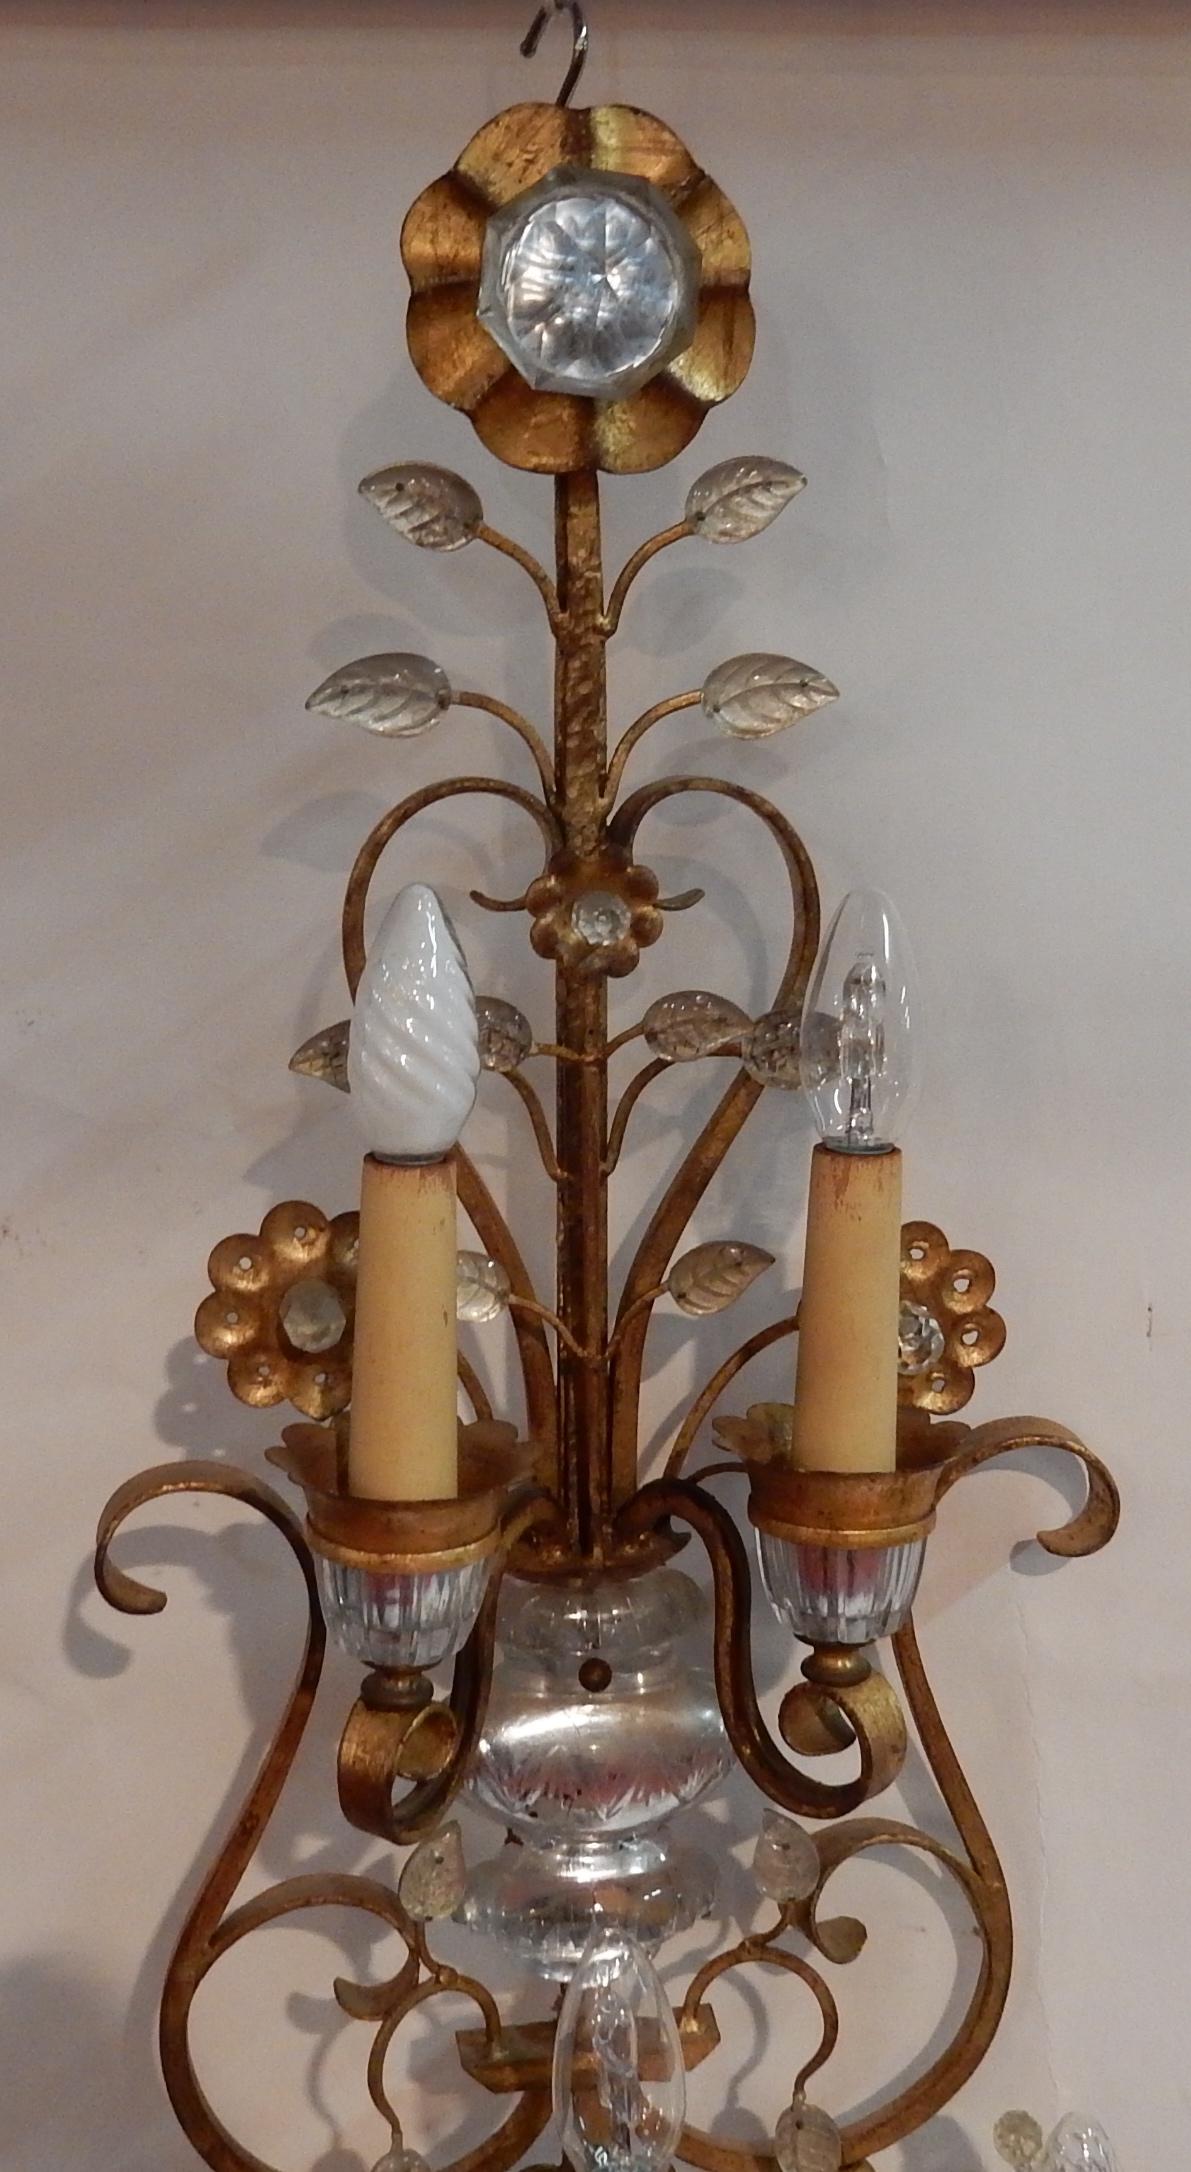 Pair of patina iron wall lamps decorated with crystal or glass. Urn and leaf decoration
Maison Banci
Circa 1970
Good condition

Measures: Length : 104 cm
Width : 40 cm
Depth : 16 cm.